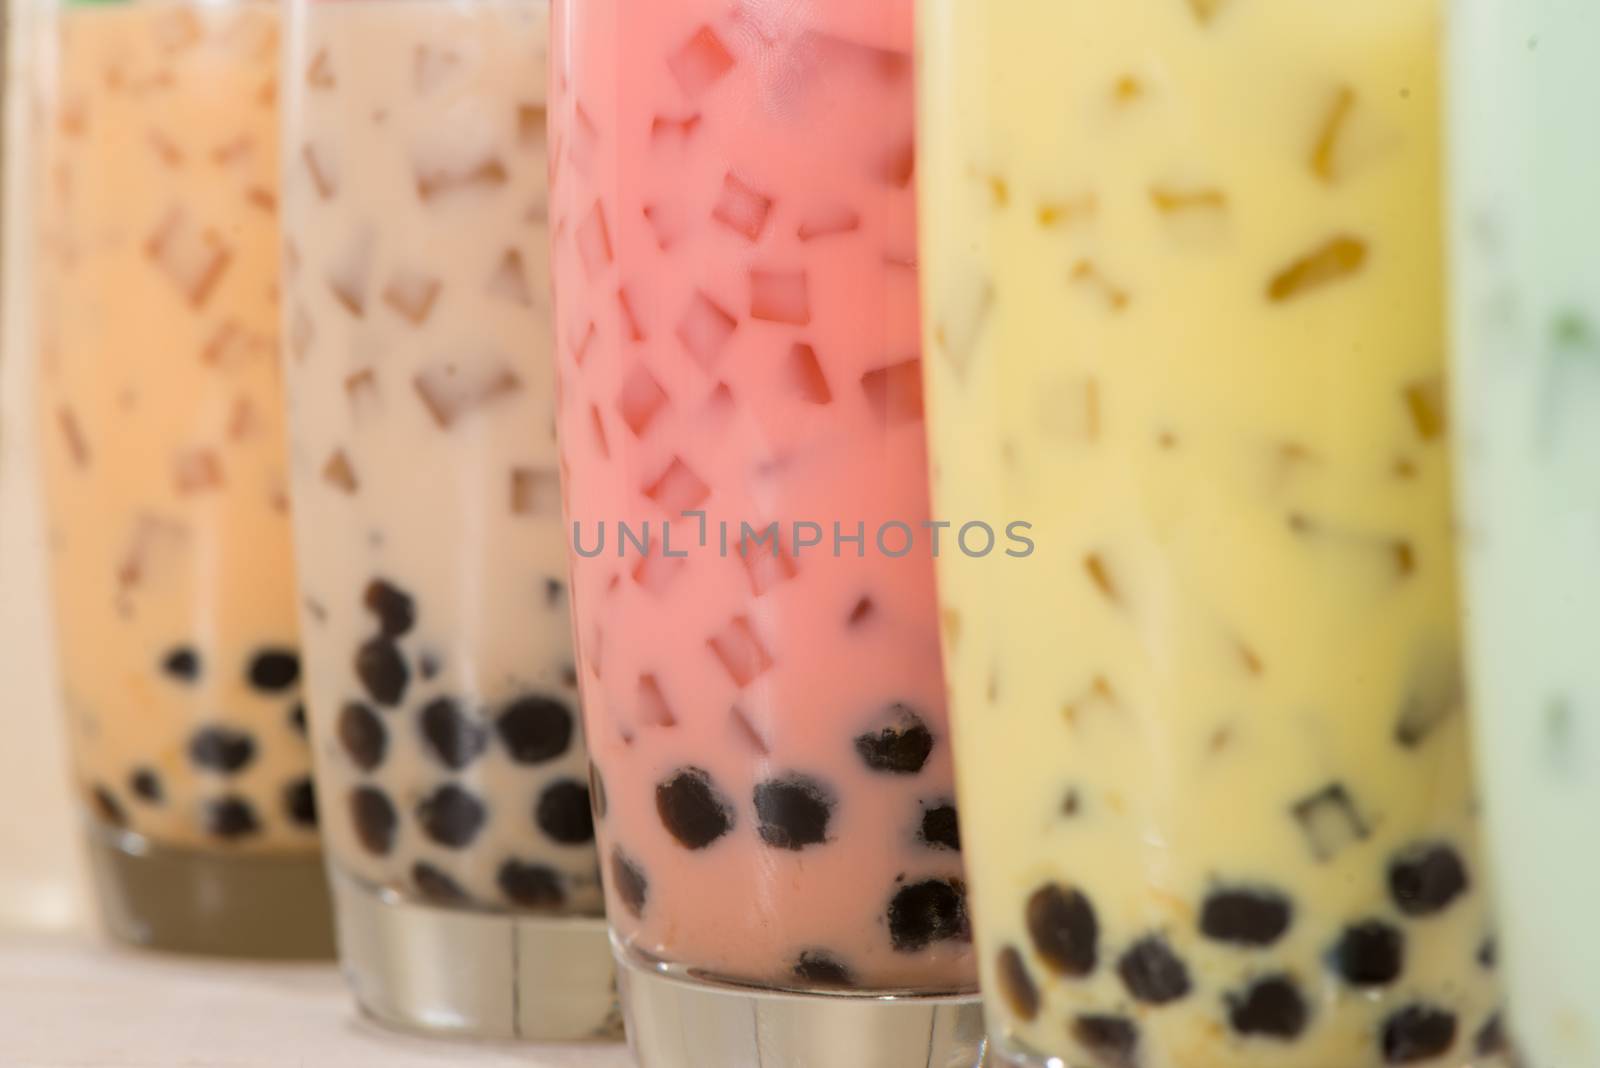 Boba / Bubble tea. Homemade Various Milk Tea with Pearls on wooden table.